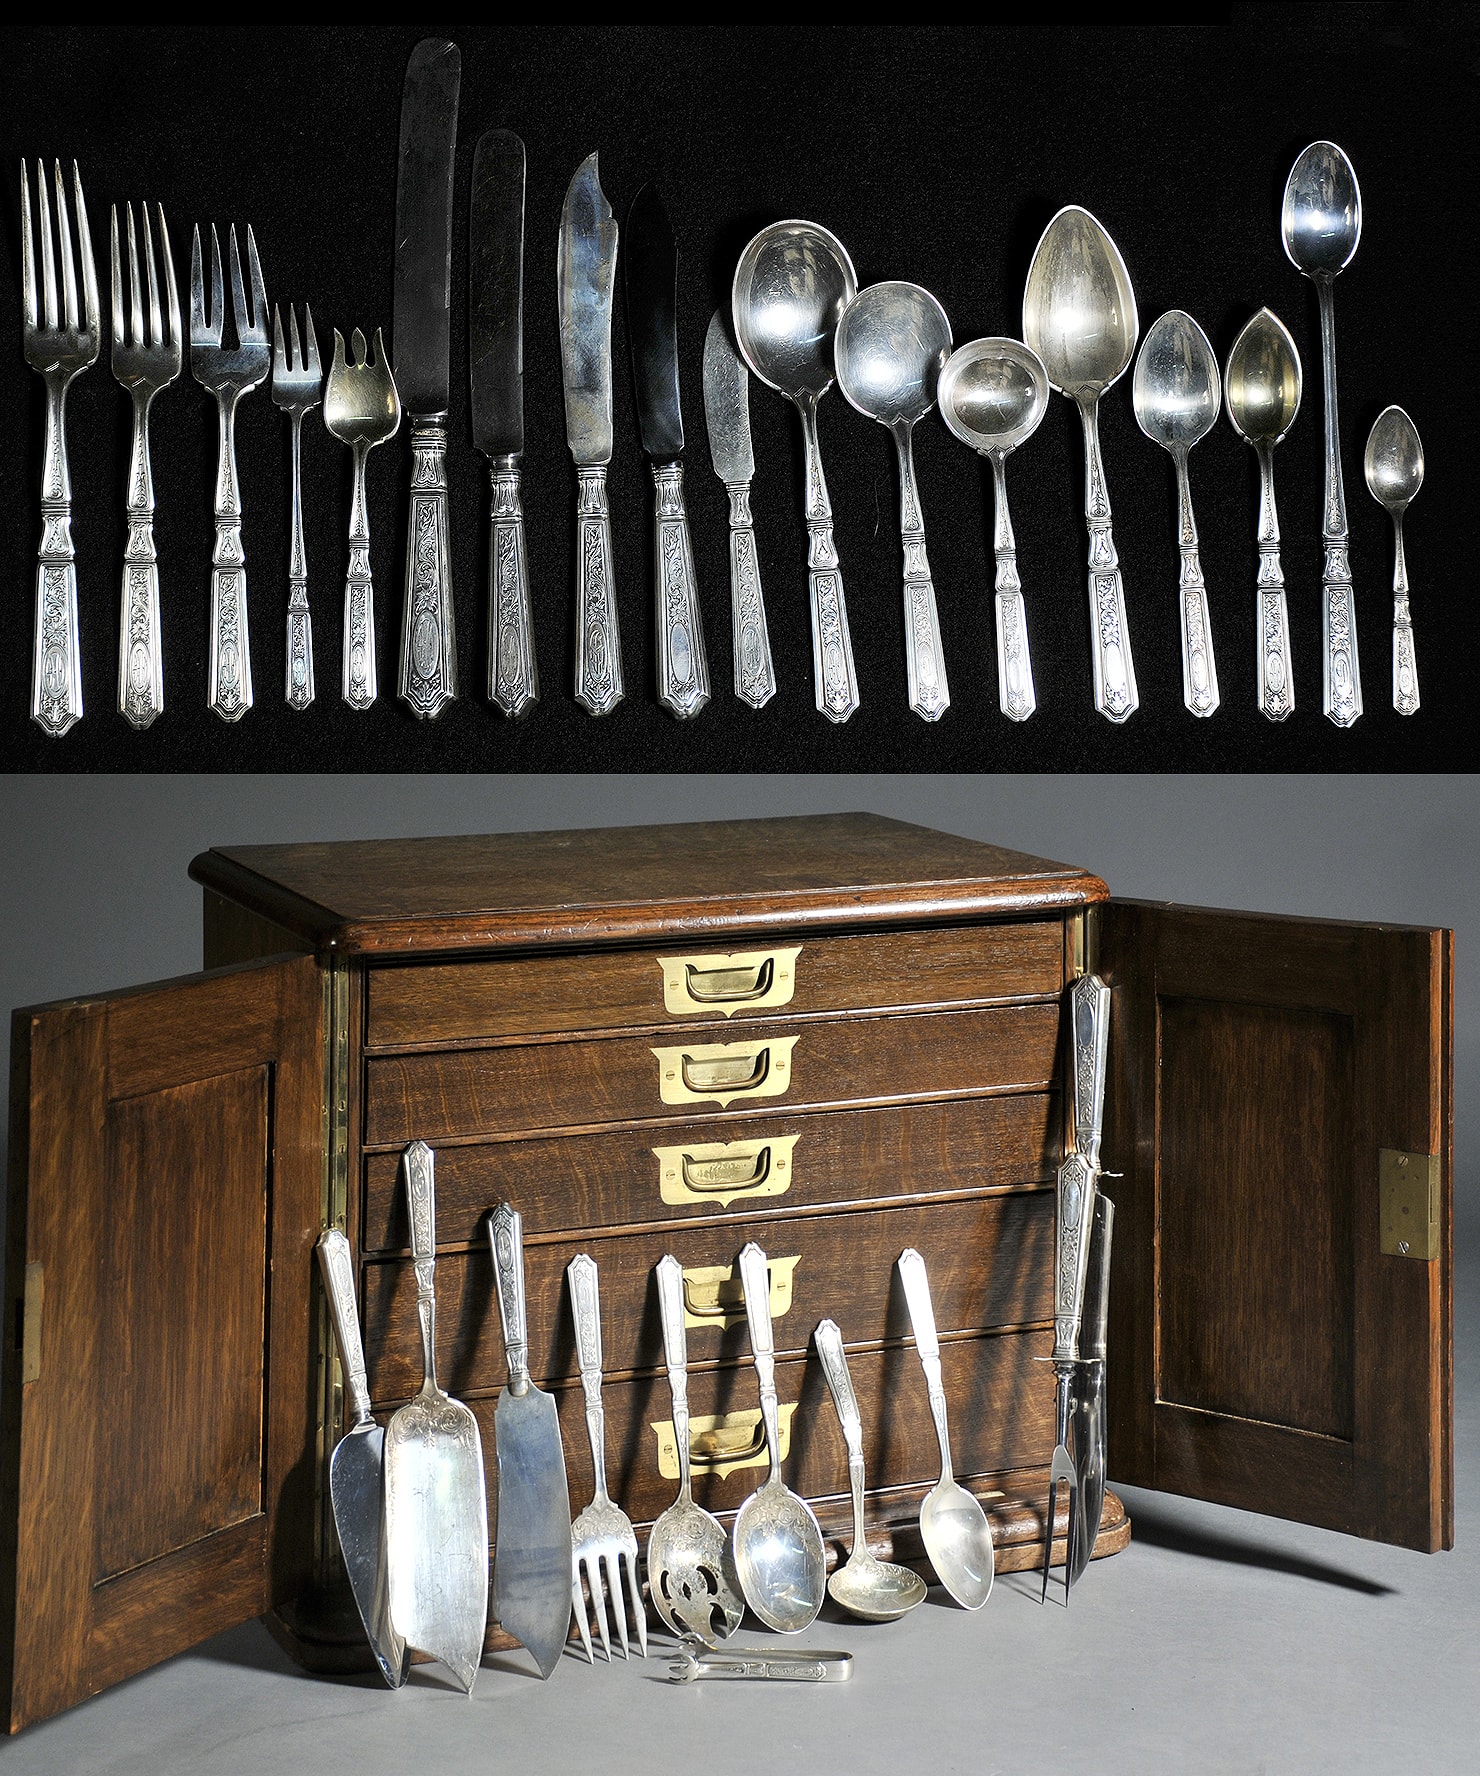 Tiffany and Co. sterling flatware $17,500